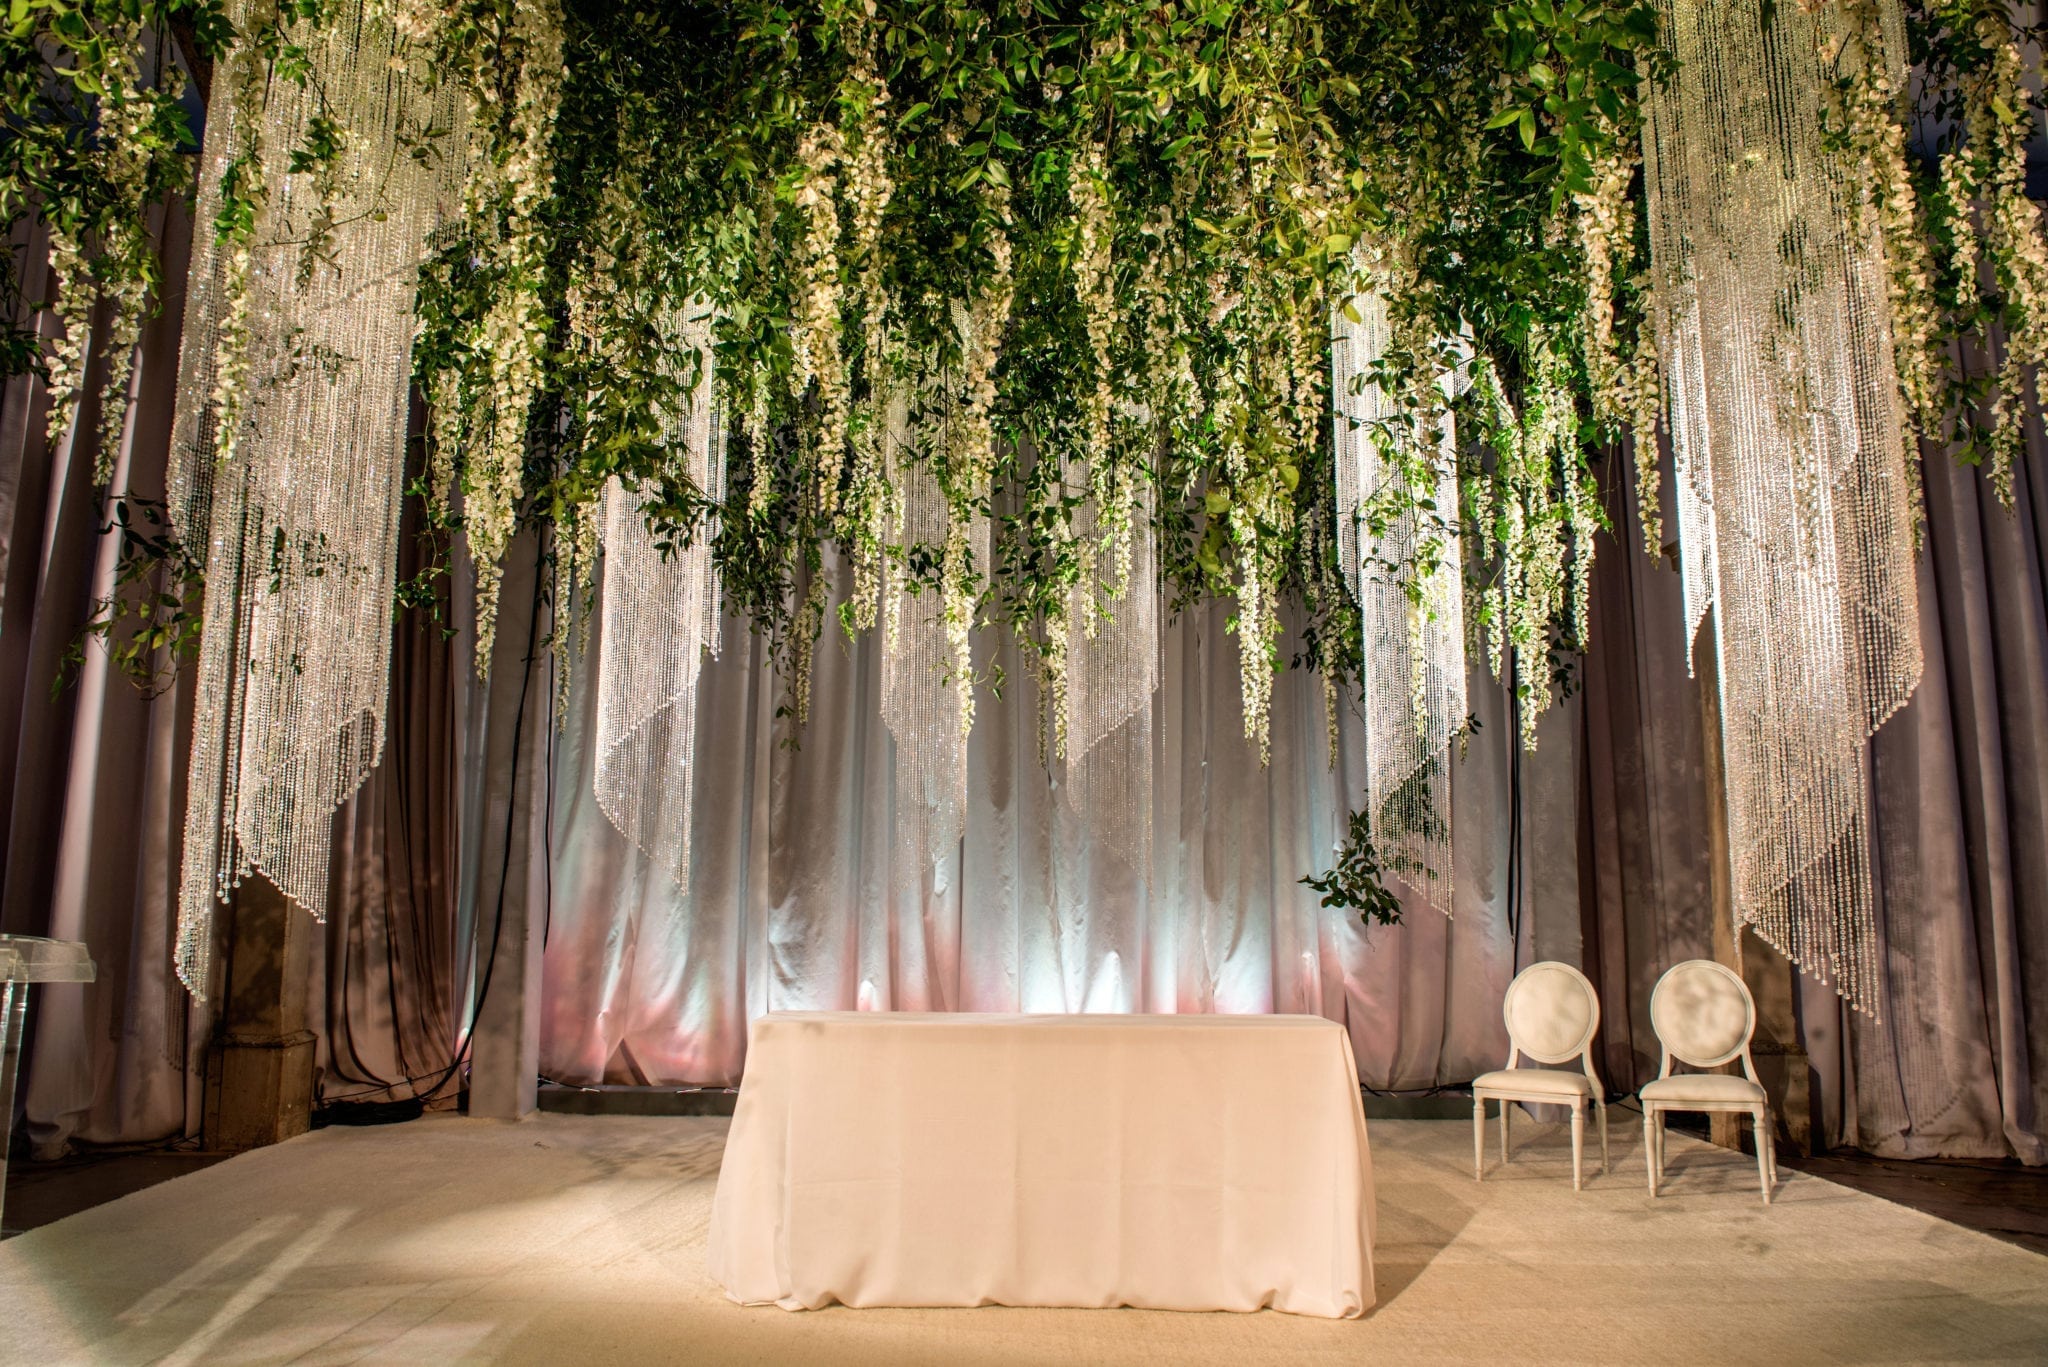 elegant wedding florals for january wedding in new orleans louisiana event florals by kim starr wise created dreamy secret garden with vines and flowers for wedding ceremony altar with chandeliers